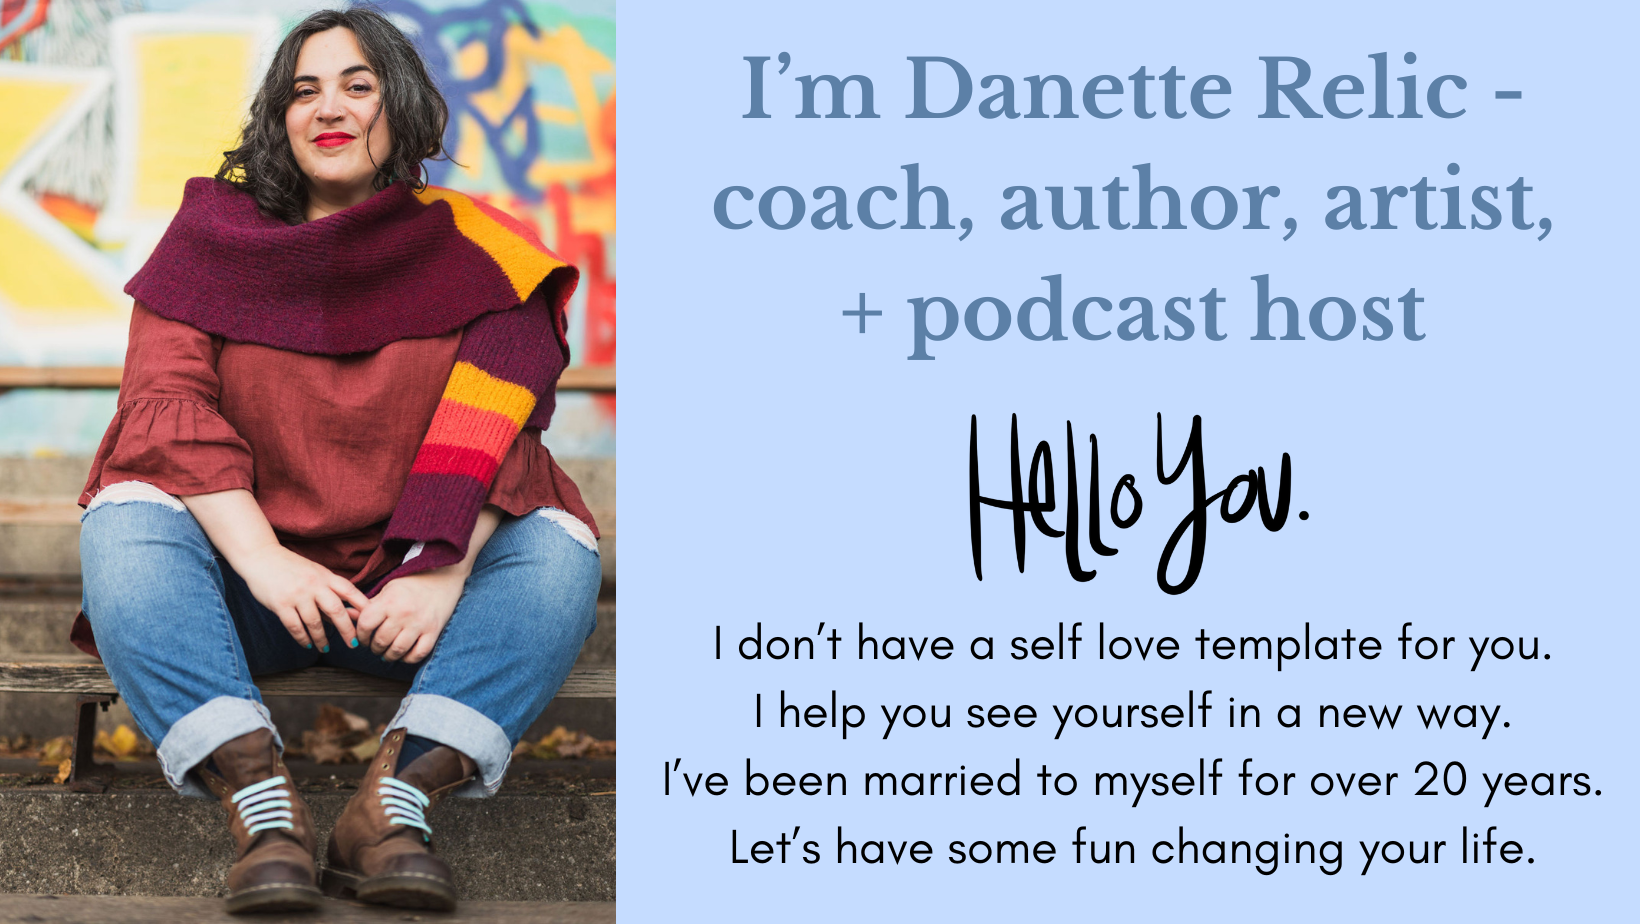 I'm Danette Relic - coach, author, artist + podcast host.
Hello You.
I don't have a self love template for you. I help you see yourself in a new way. I've been married to myself for over 20 years. Let's have some fun changing your life.